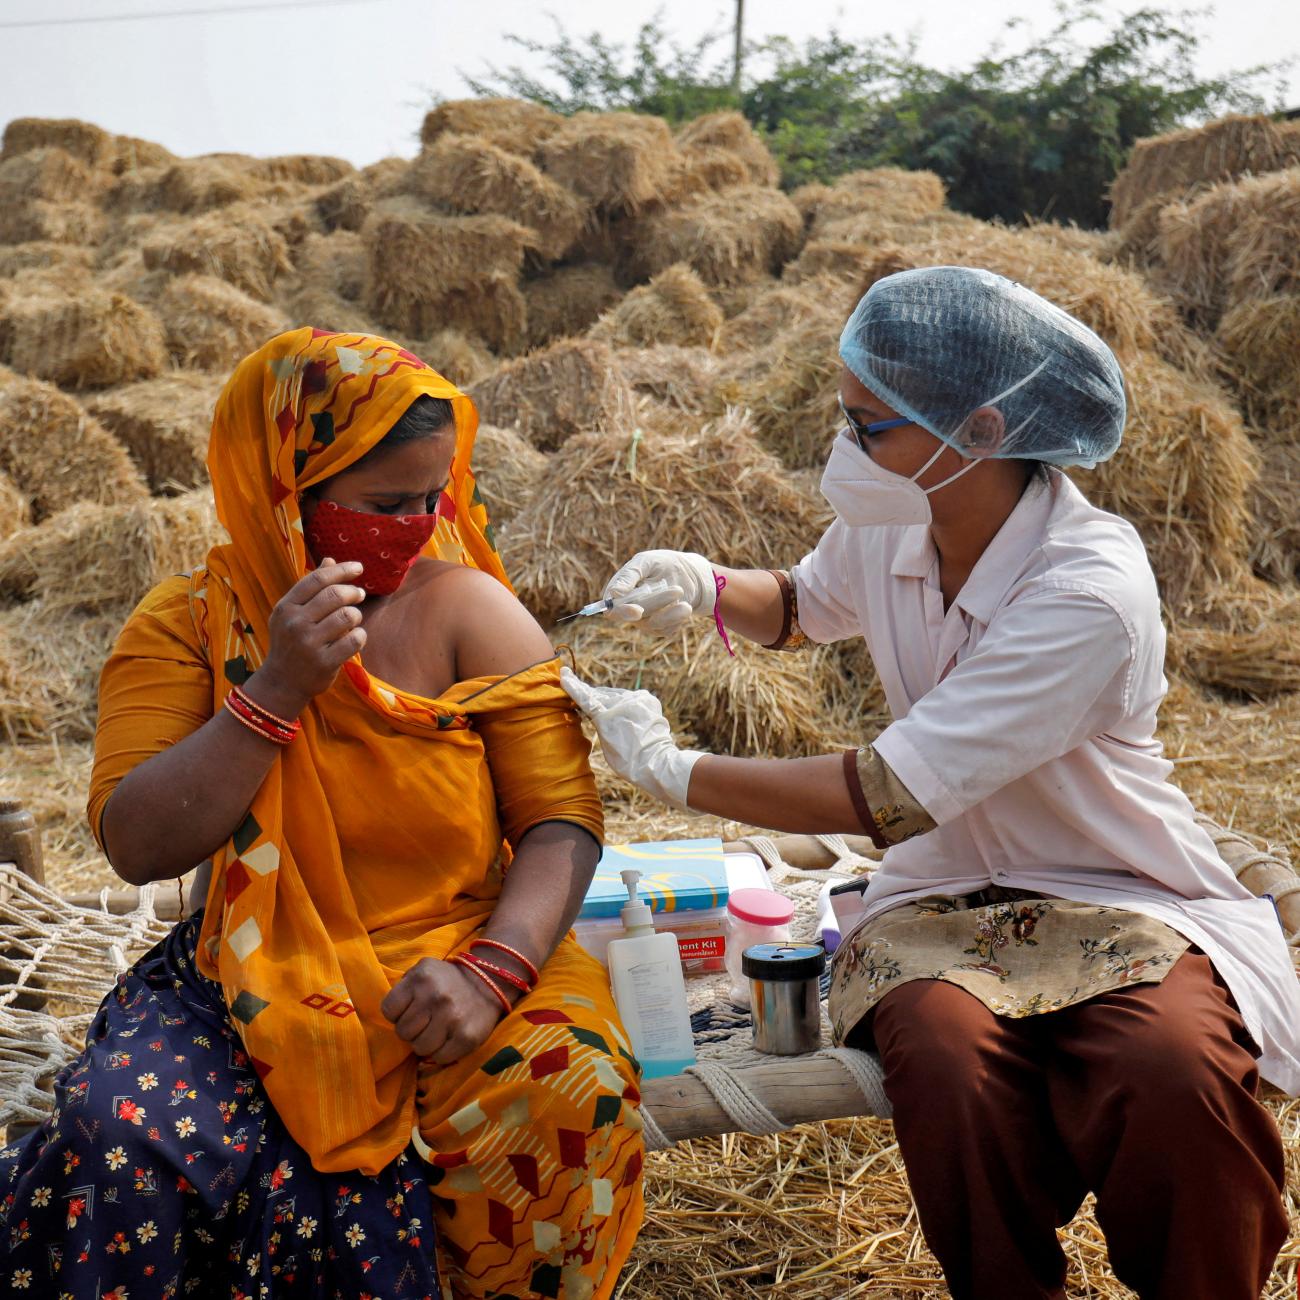 Jabuben Bharwad, 30, receives a dose of COVISHIELD vaccine against COVID-19, that's manufactured by Serum Institute of India, while working in a field during a door-to-door vaccination drive at Mahijada village on the outskirts of Ahmedabad, India, December 15, 2021